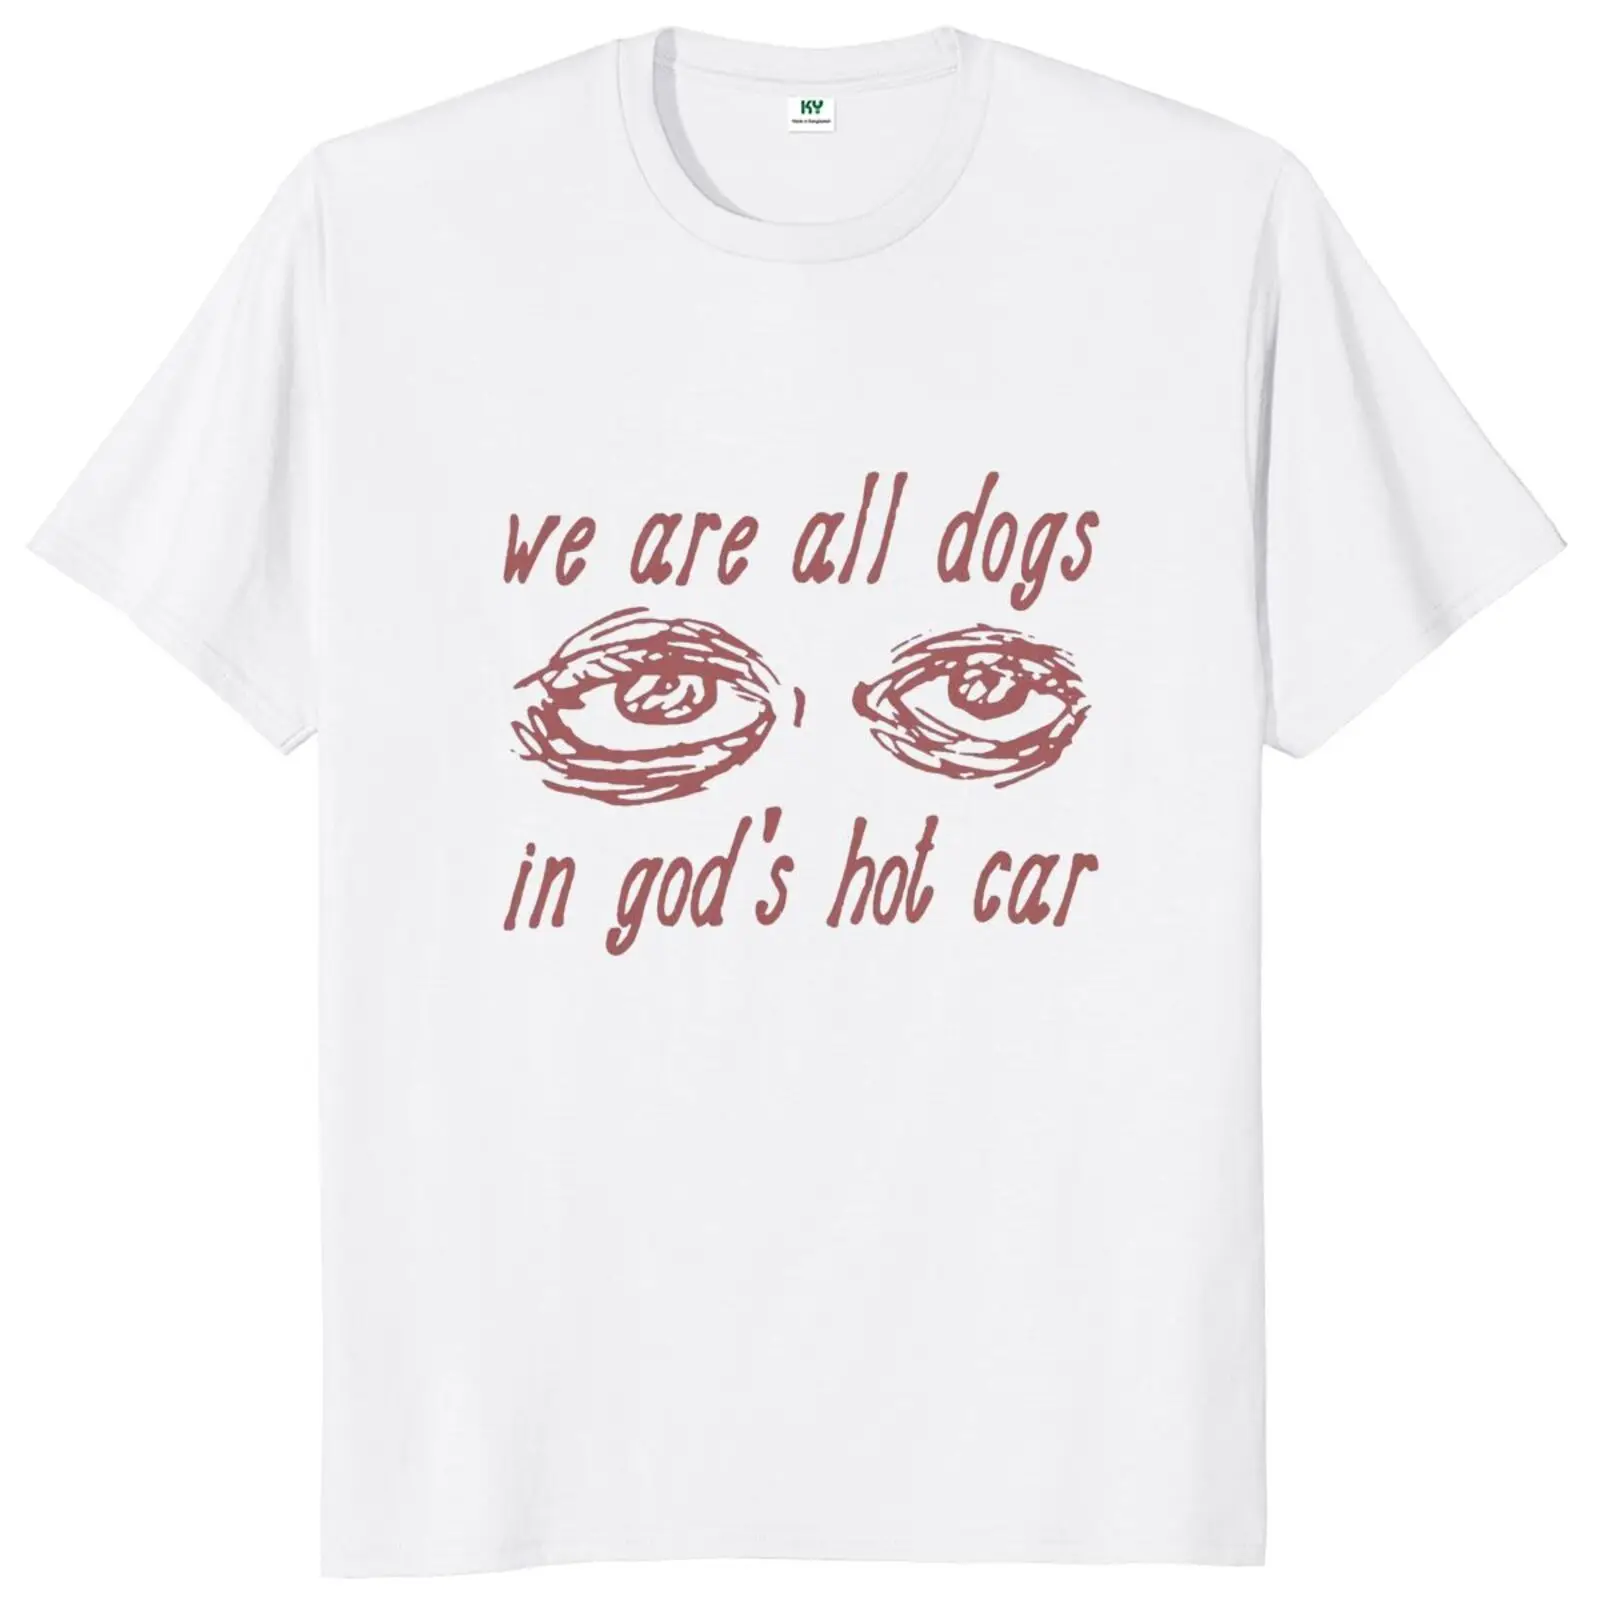 

We Are All Dogs In God's Hot Car T Shirt Oddly Specific Meme Unisex T-Shirt Round Neck Tops Plus Size